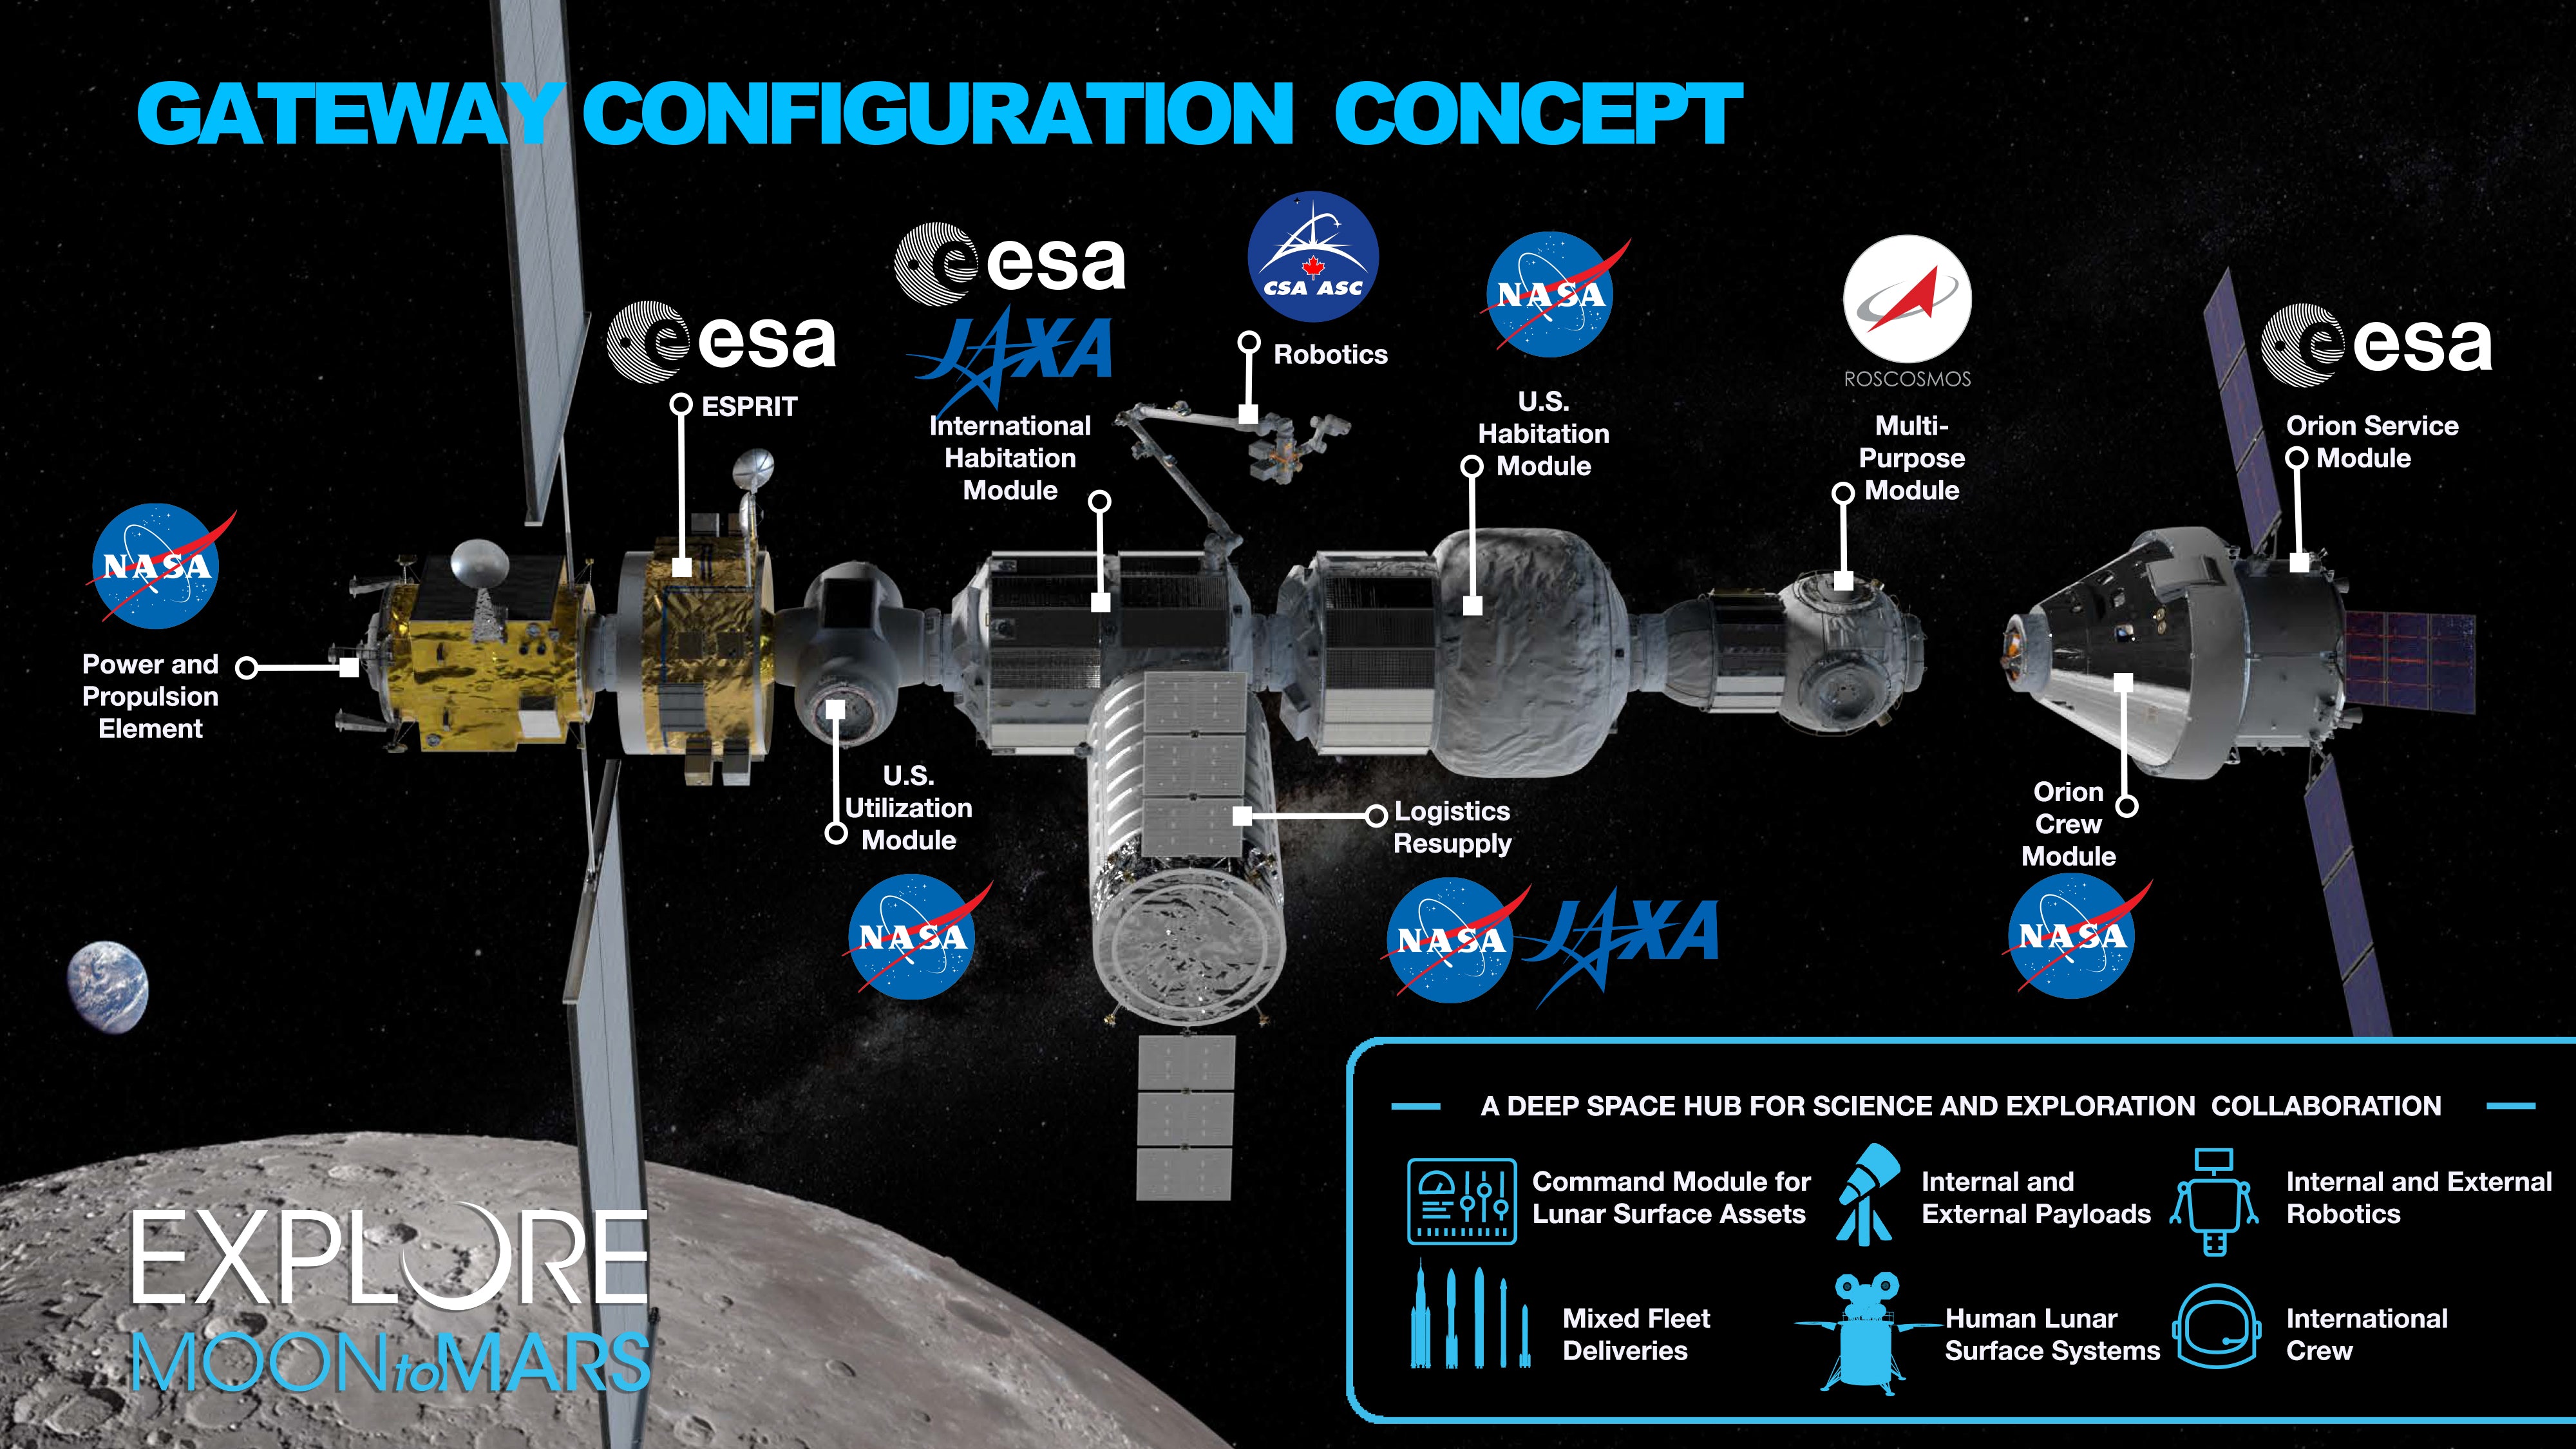 NASA eliminates Boeing and selects SpaceX to conduct Lunar Gateway missions